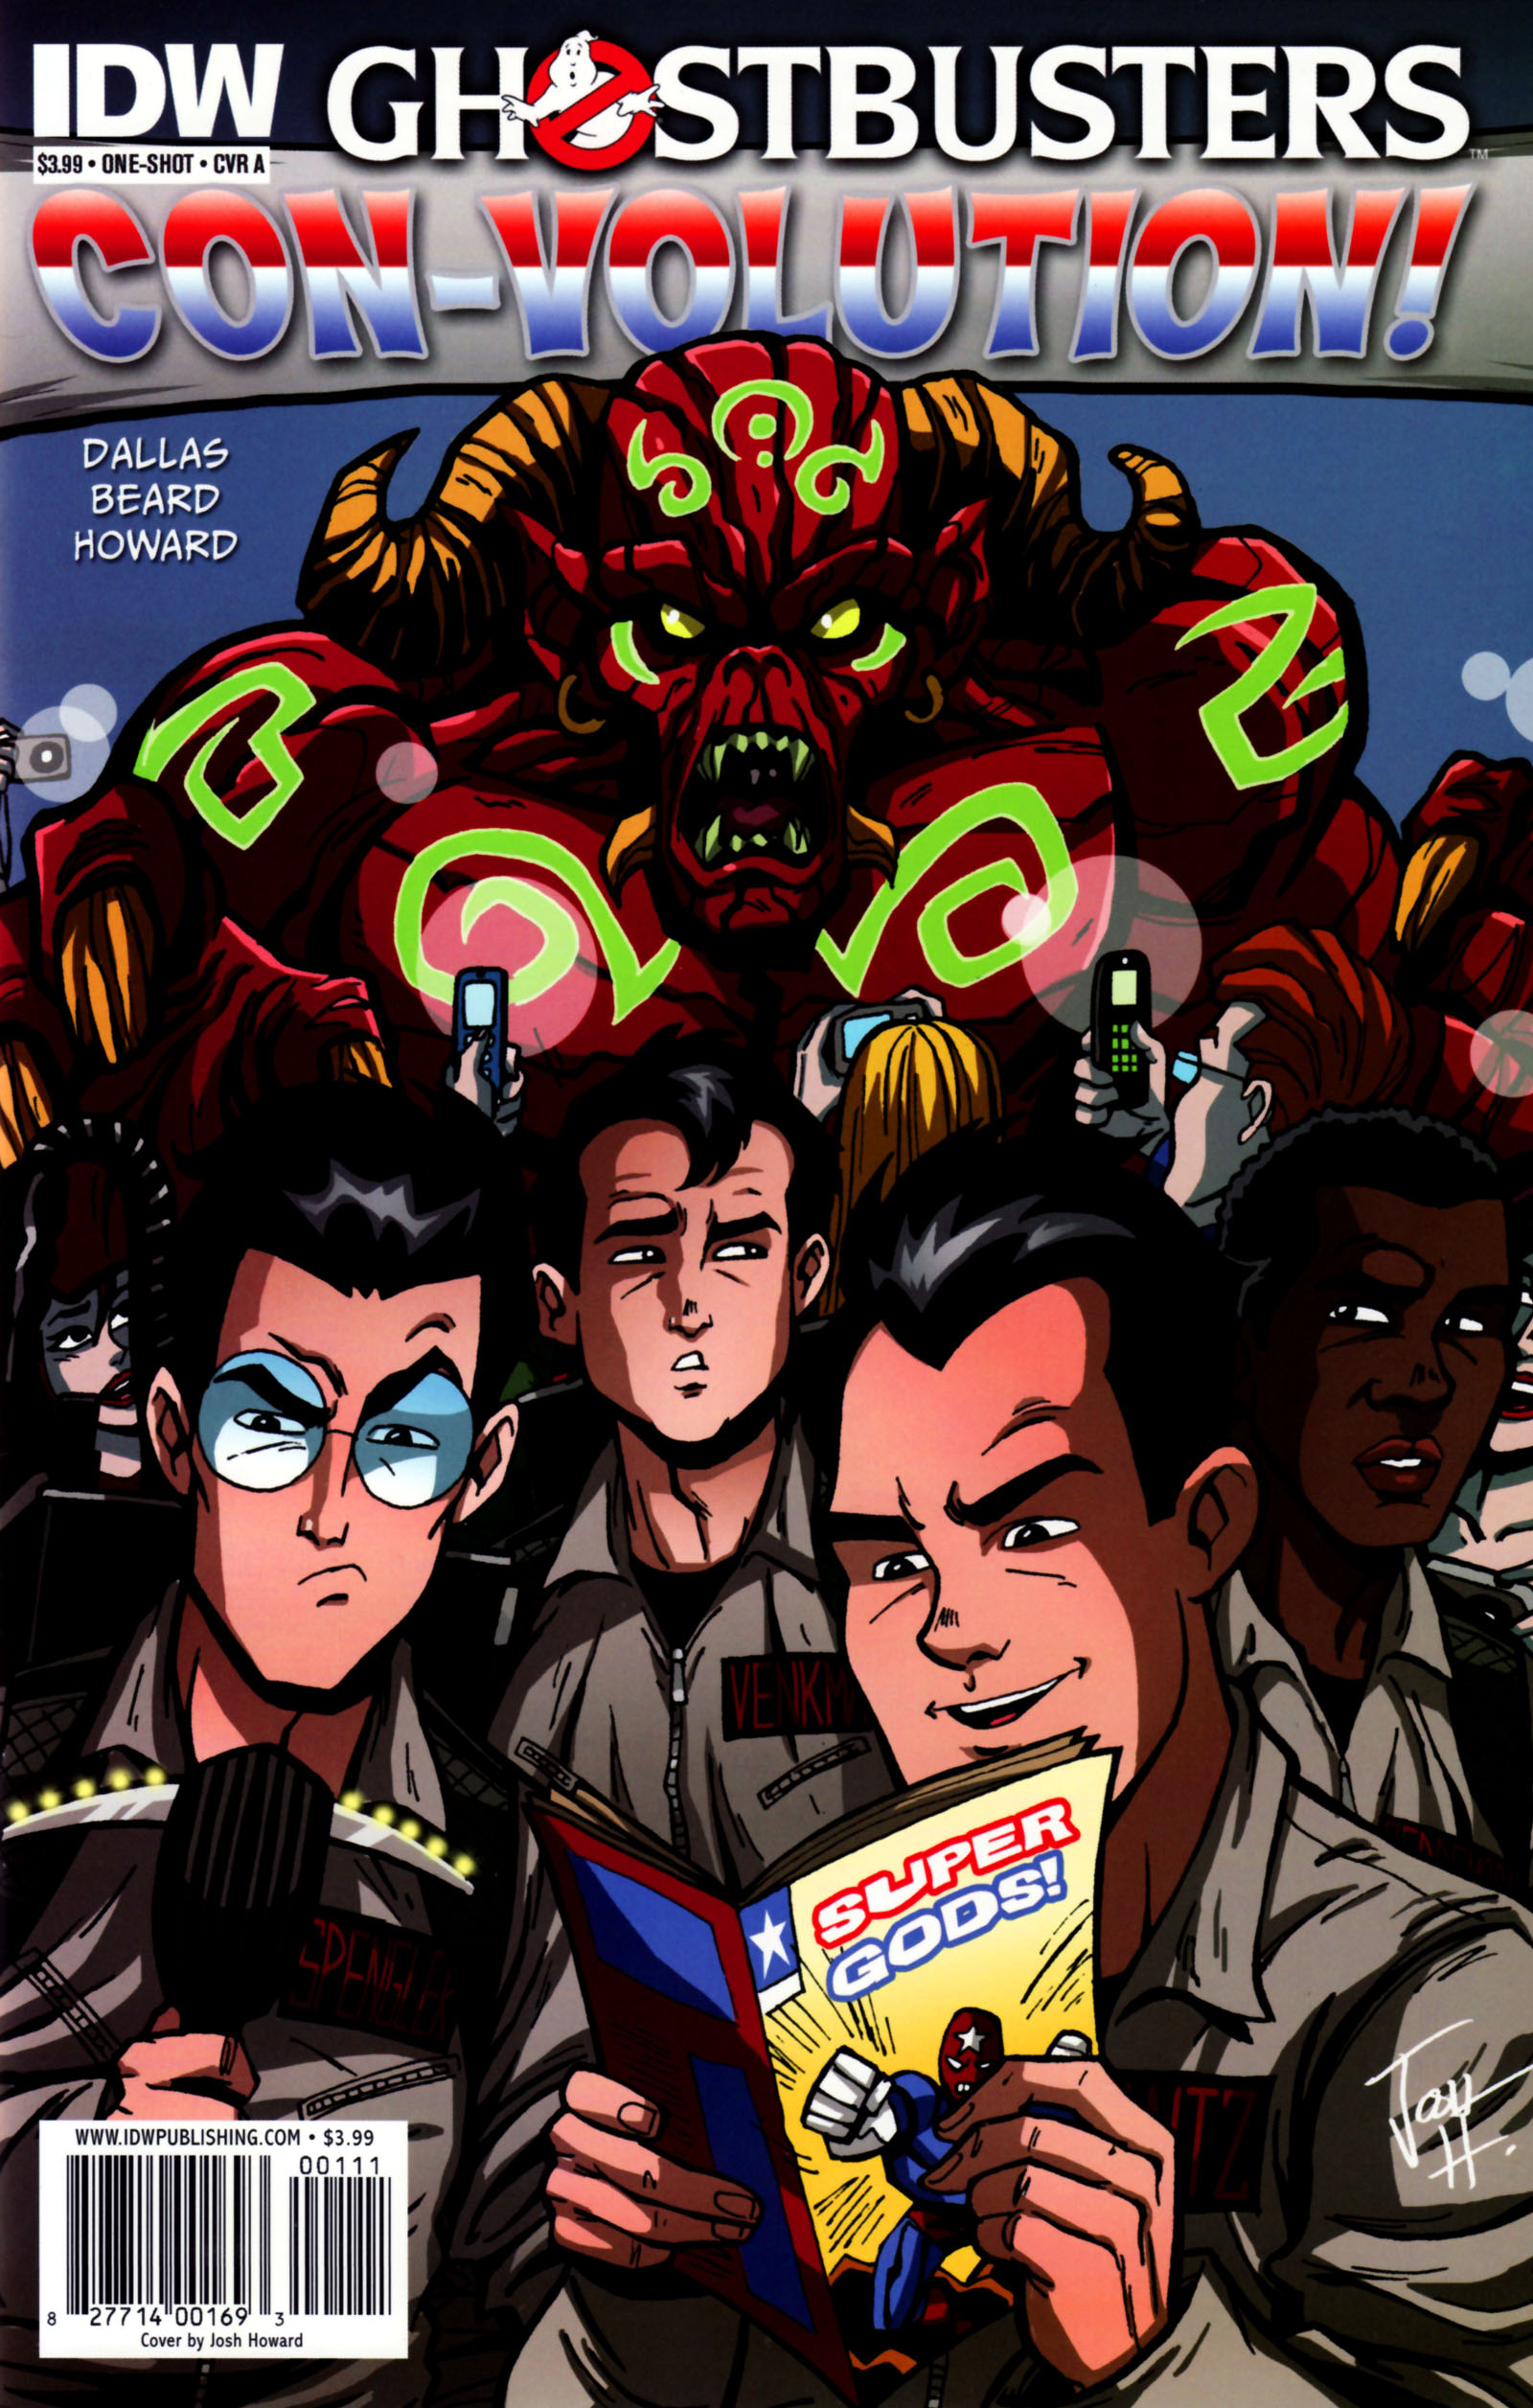 Read online Ghostbusters: Con-Volution comic -  Issue # Full - 1